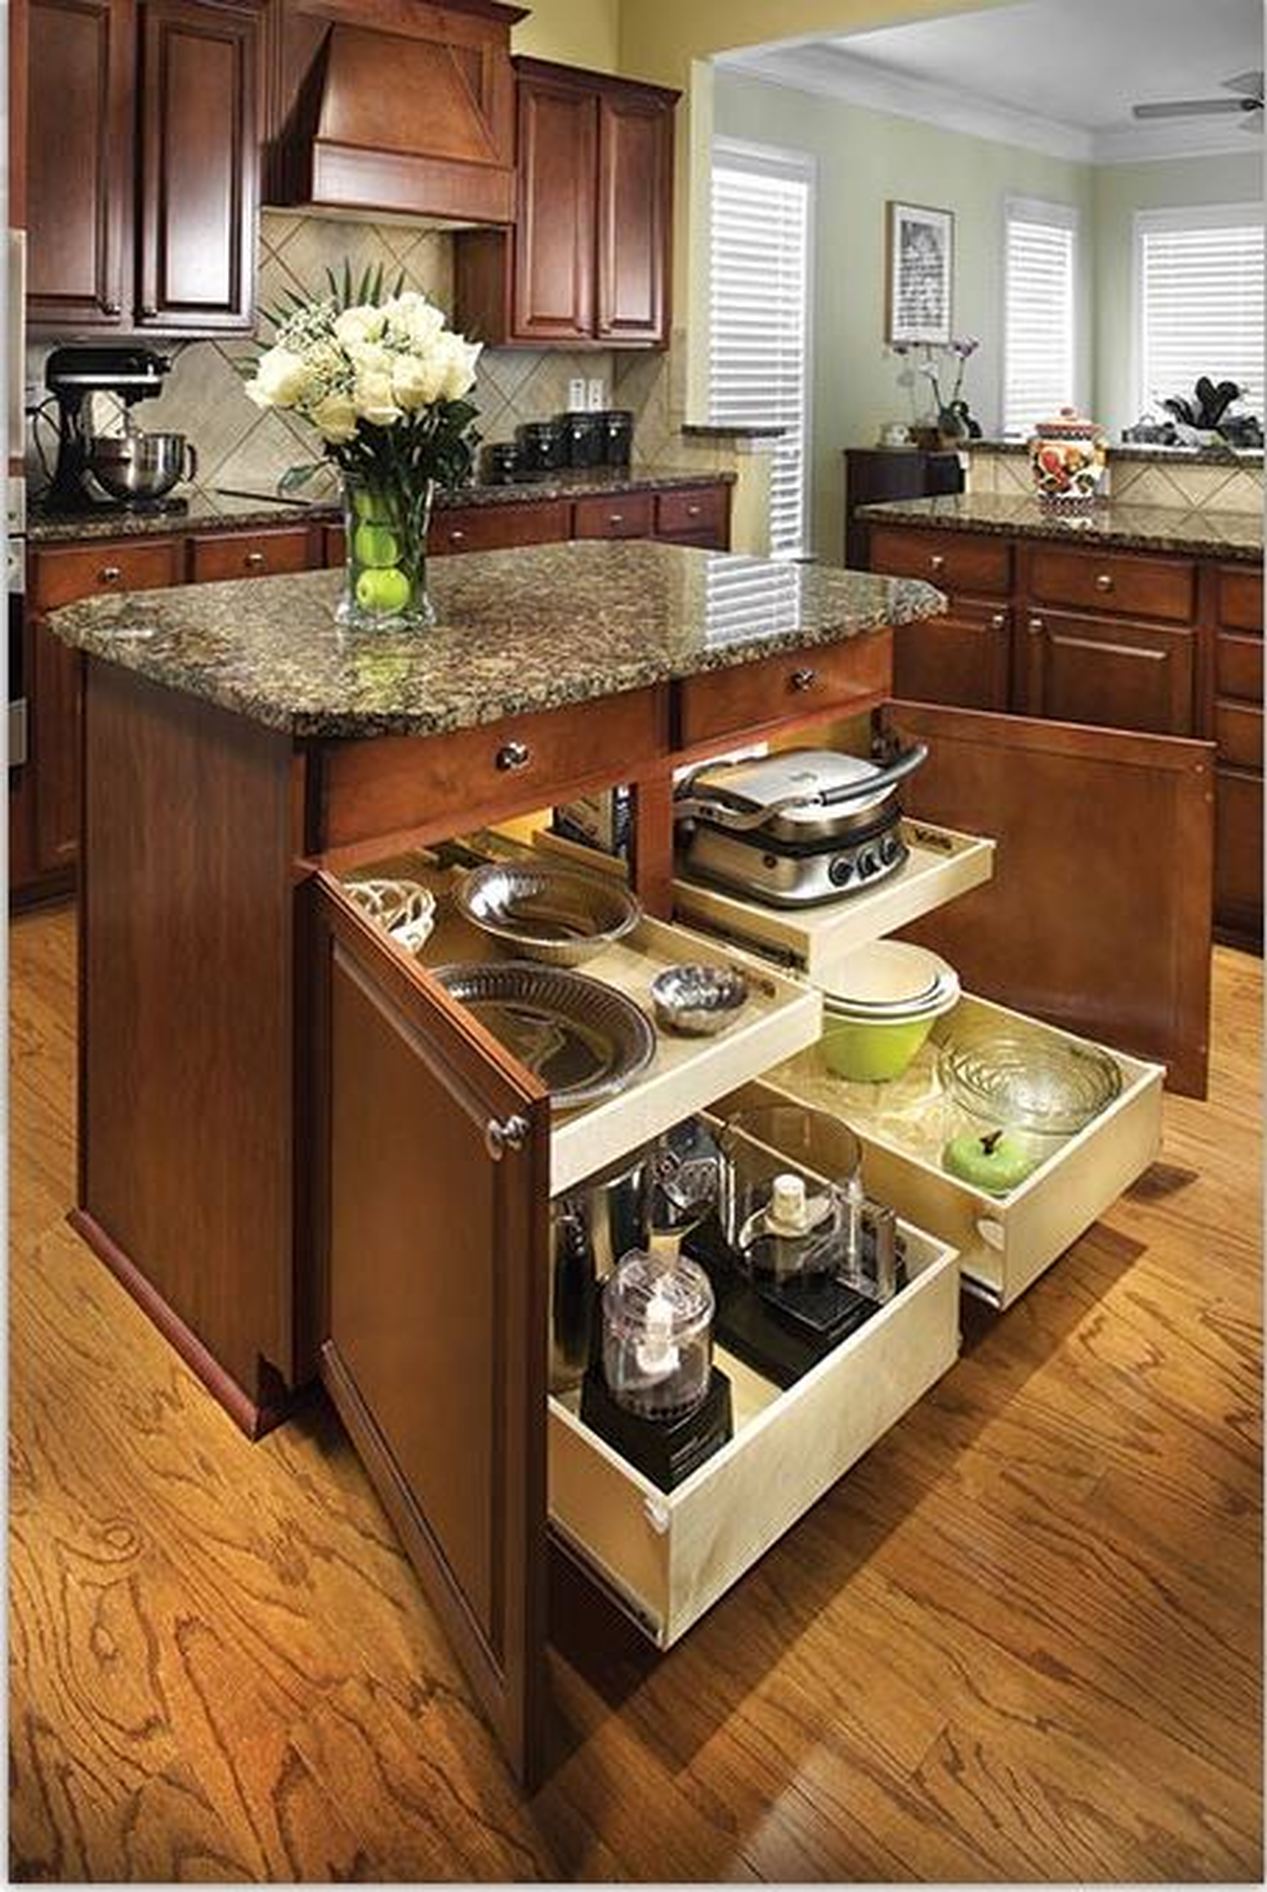 Cabinets | Home Pros Guide